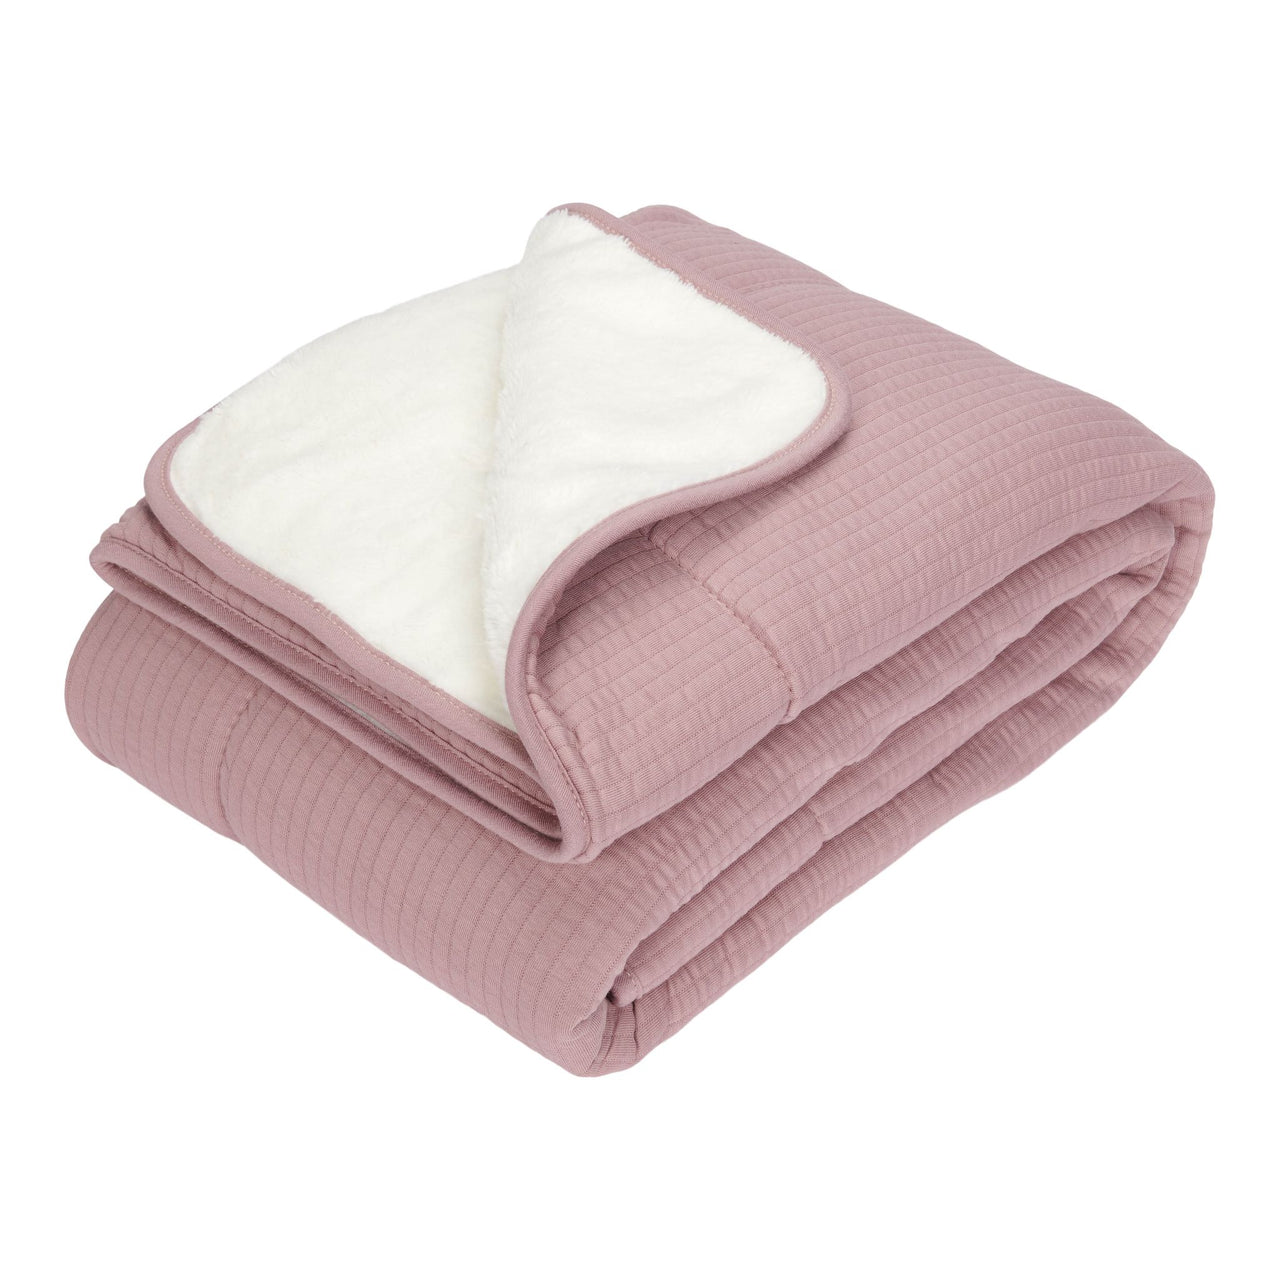 This Little Dutch cot blanket is a beautiful blanket that keeps your child comfortably warm. The blanket has a soft cotton fabric on one side with a Little Dutch print and a lovely soft teddy fabric on the other side. The blanket is also handy as a wrap, quilt or play blanket. The blanket is machine washable.